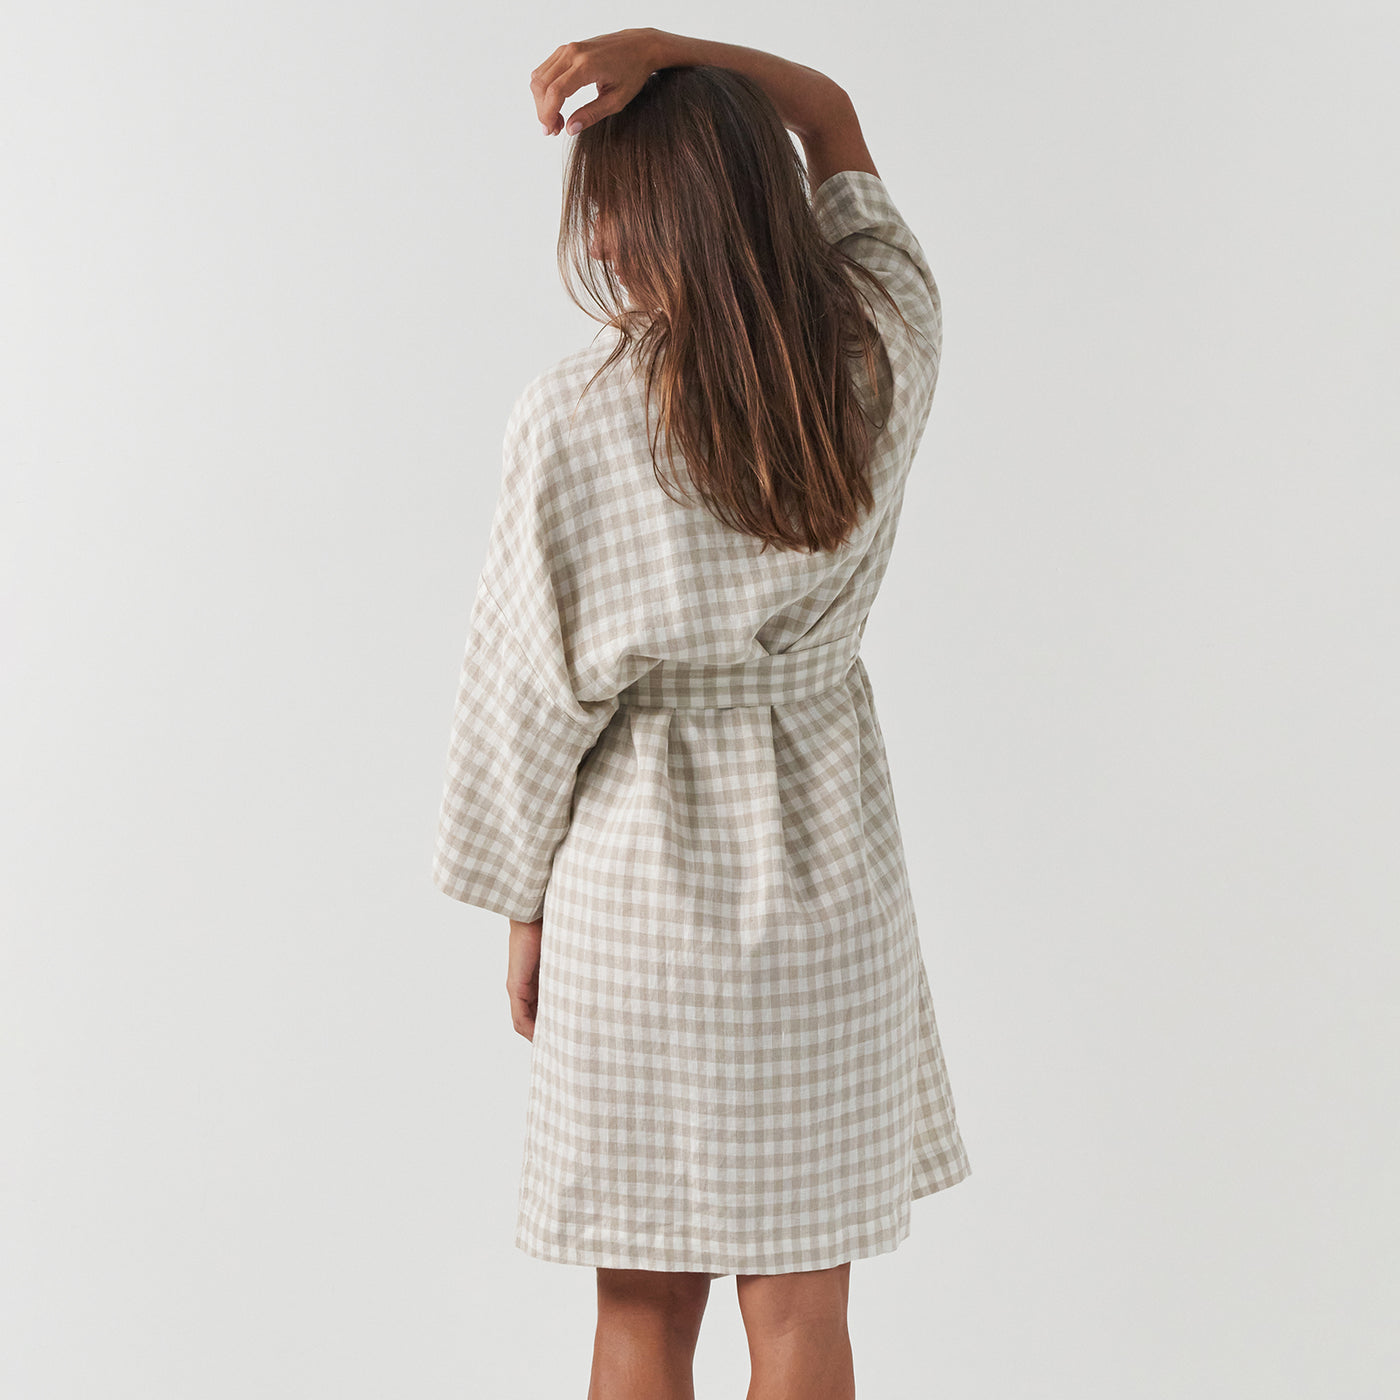 French Flax Linen Robe in Beige Gingham